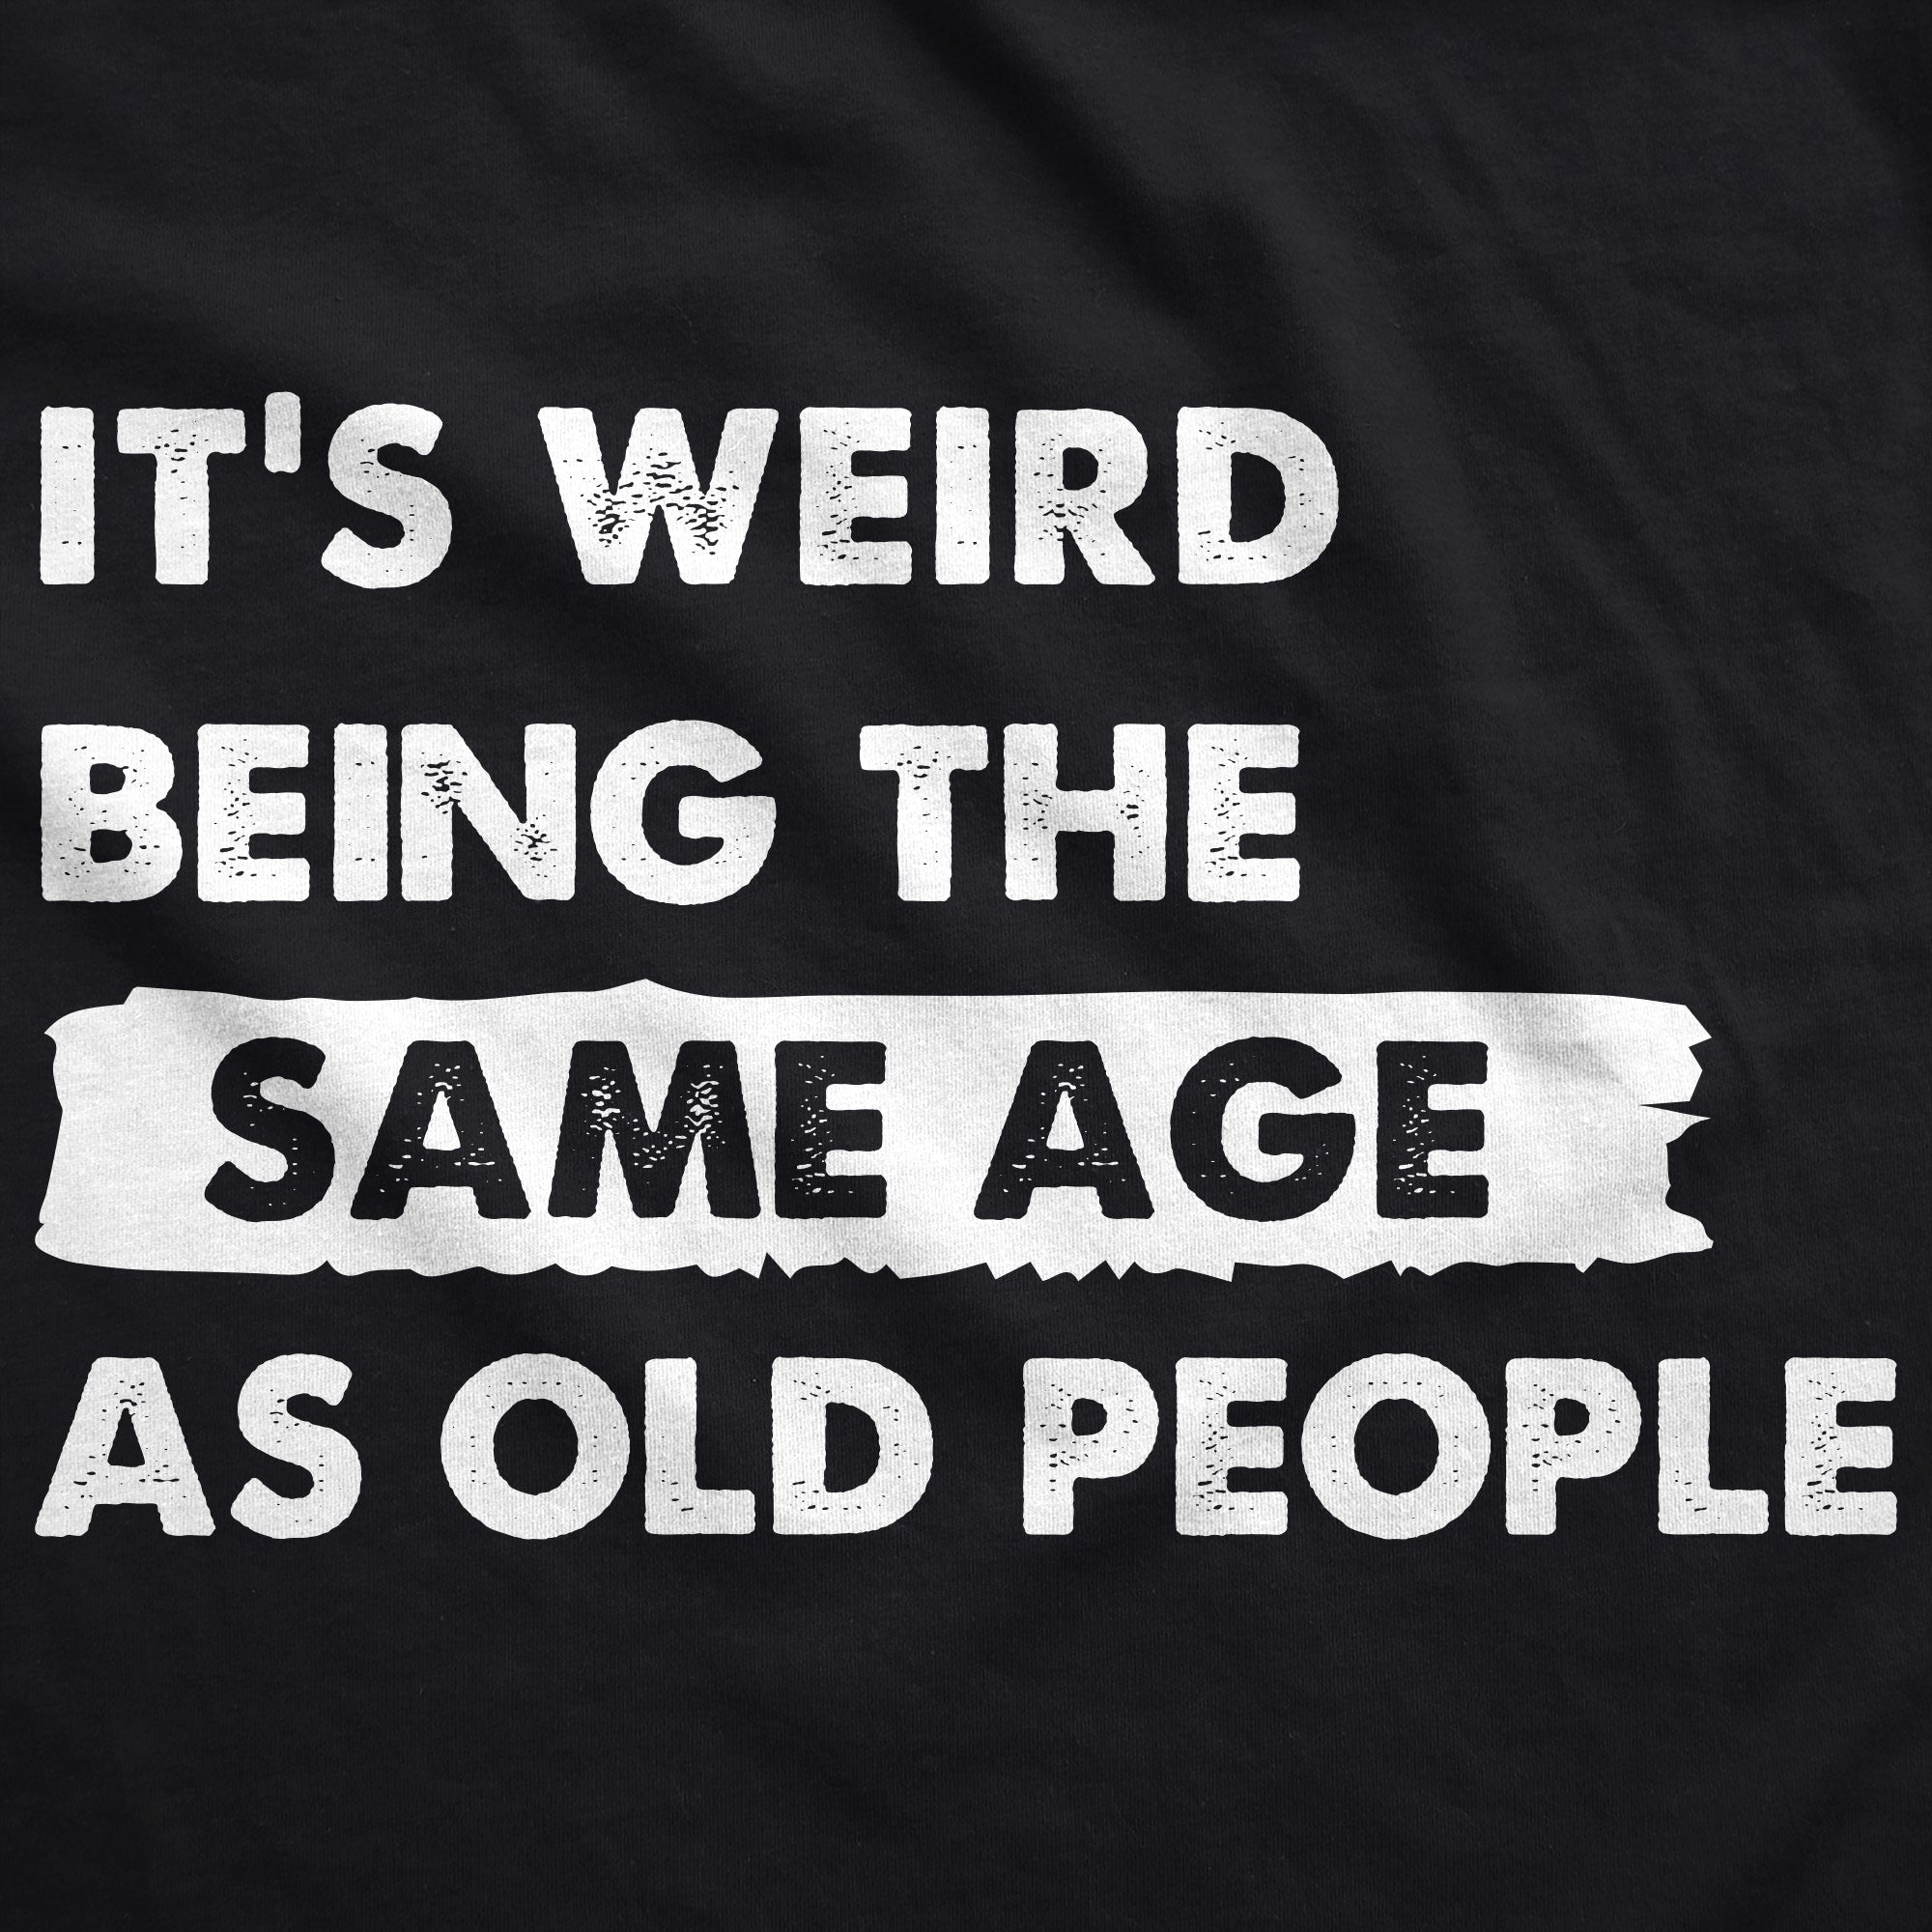 Funny Black - Same Age Its Weird Being The Same Age As Old People Hoodie Nerdy Sarcastic Tee